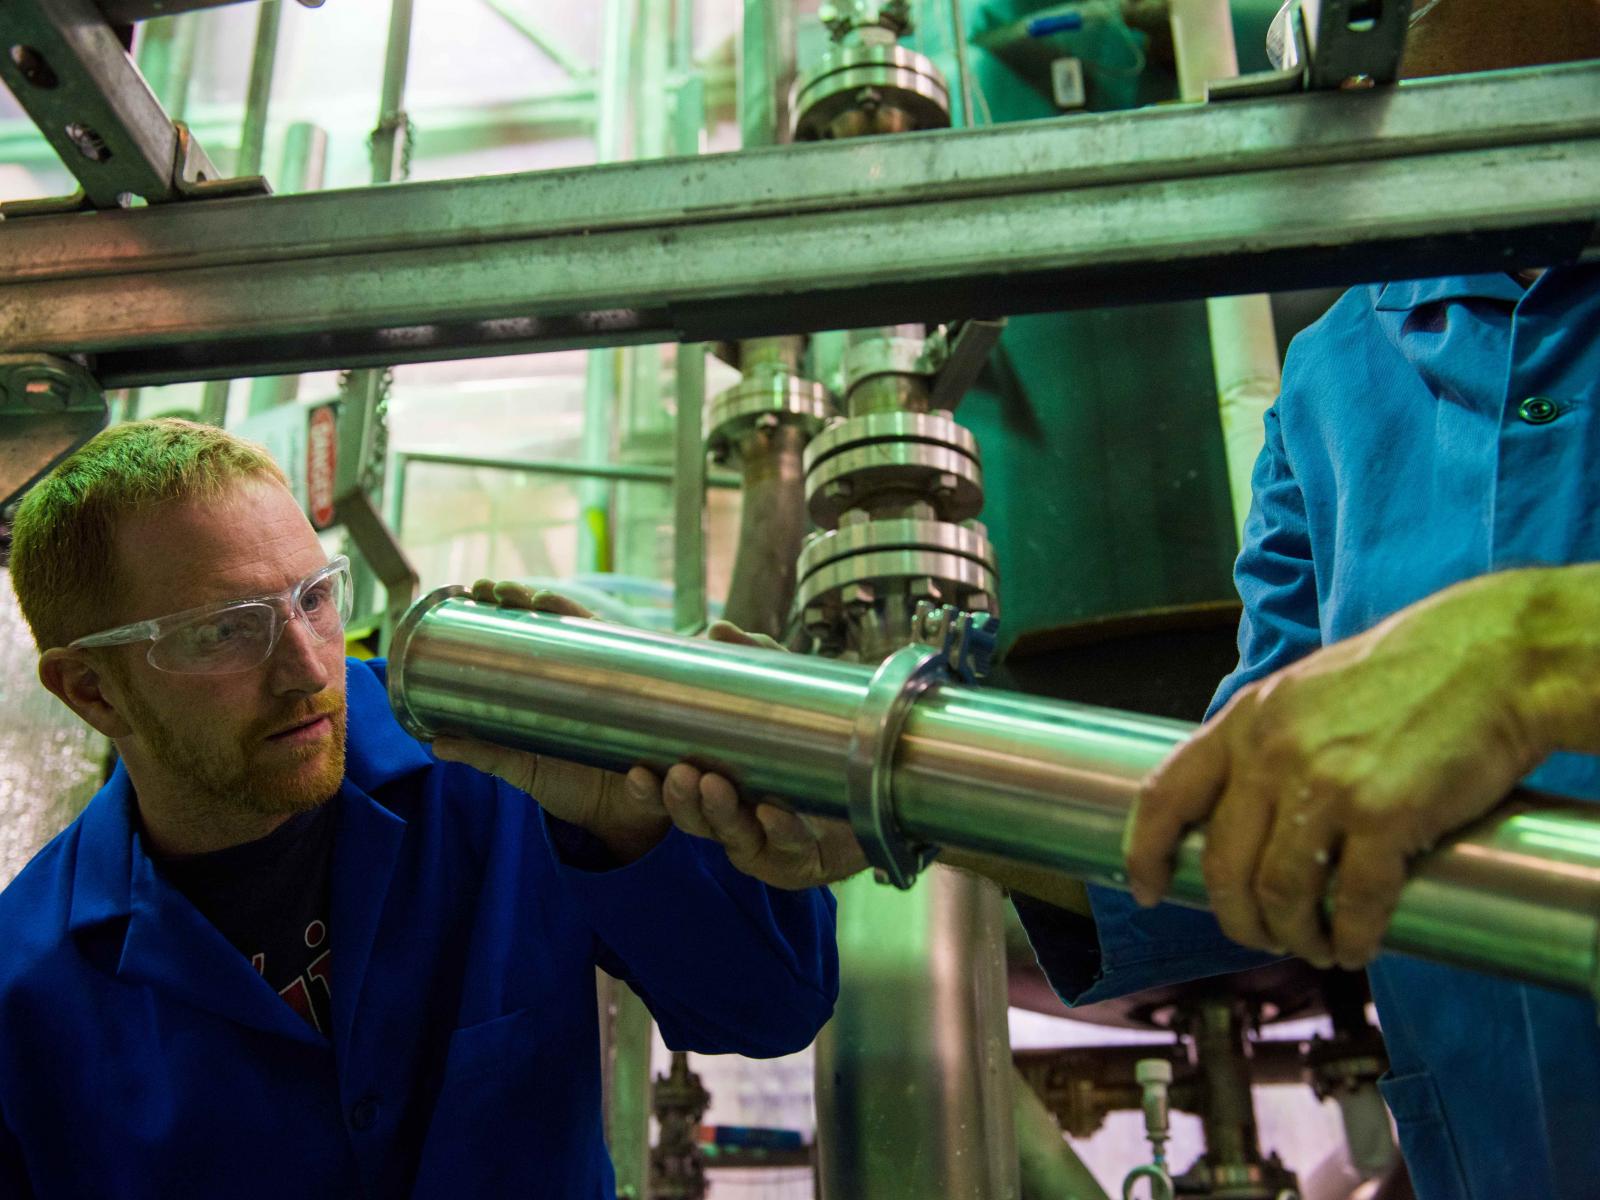 Mechanical engineer Nathan Phillips inspects a 3-inch steel pipe that contains a special filter invented at PNNL